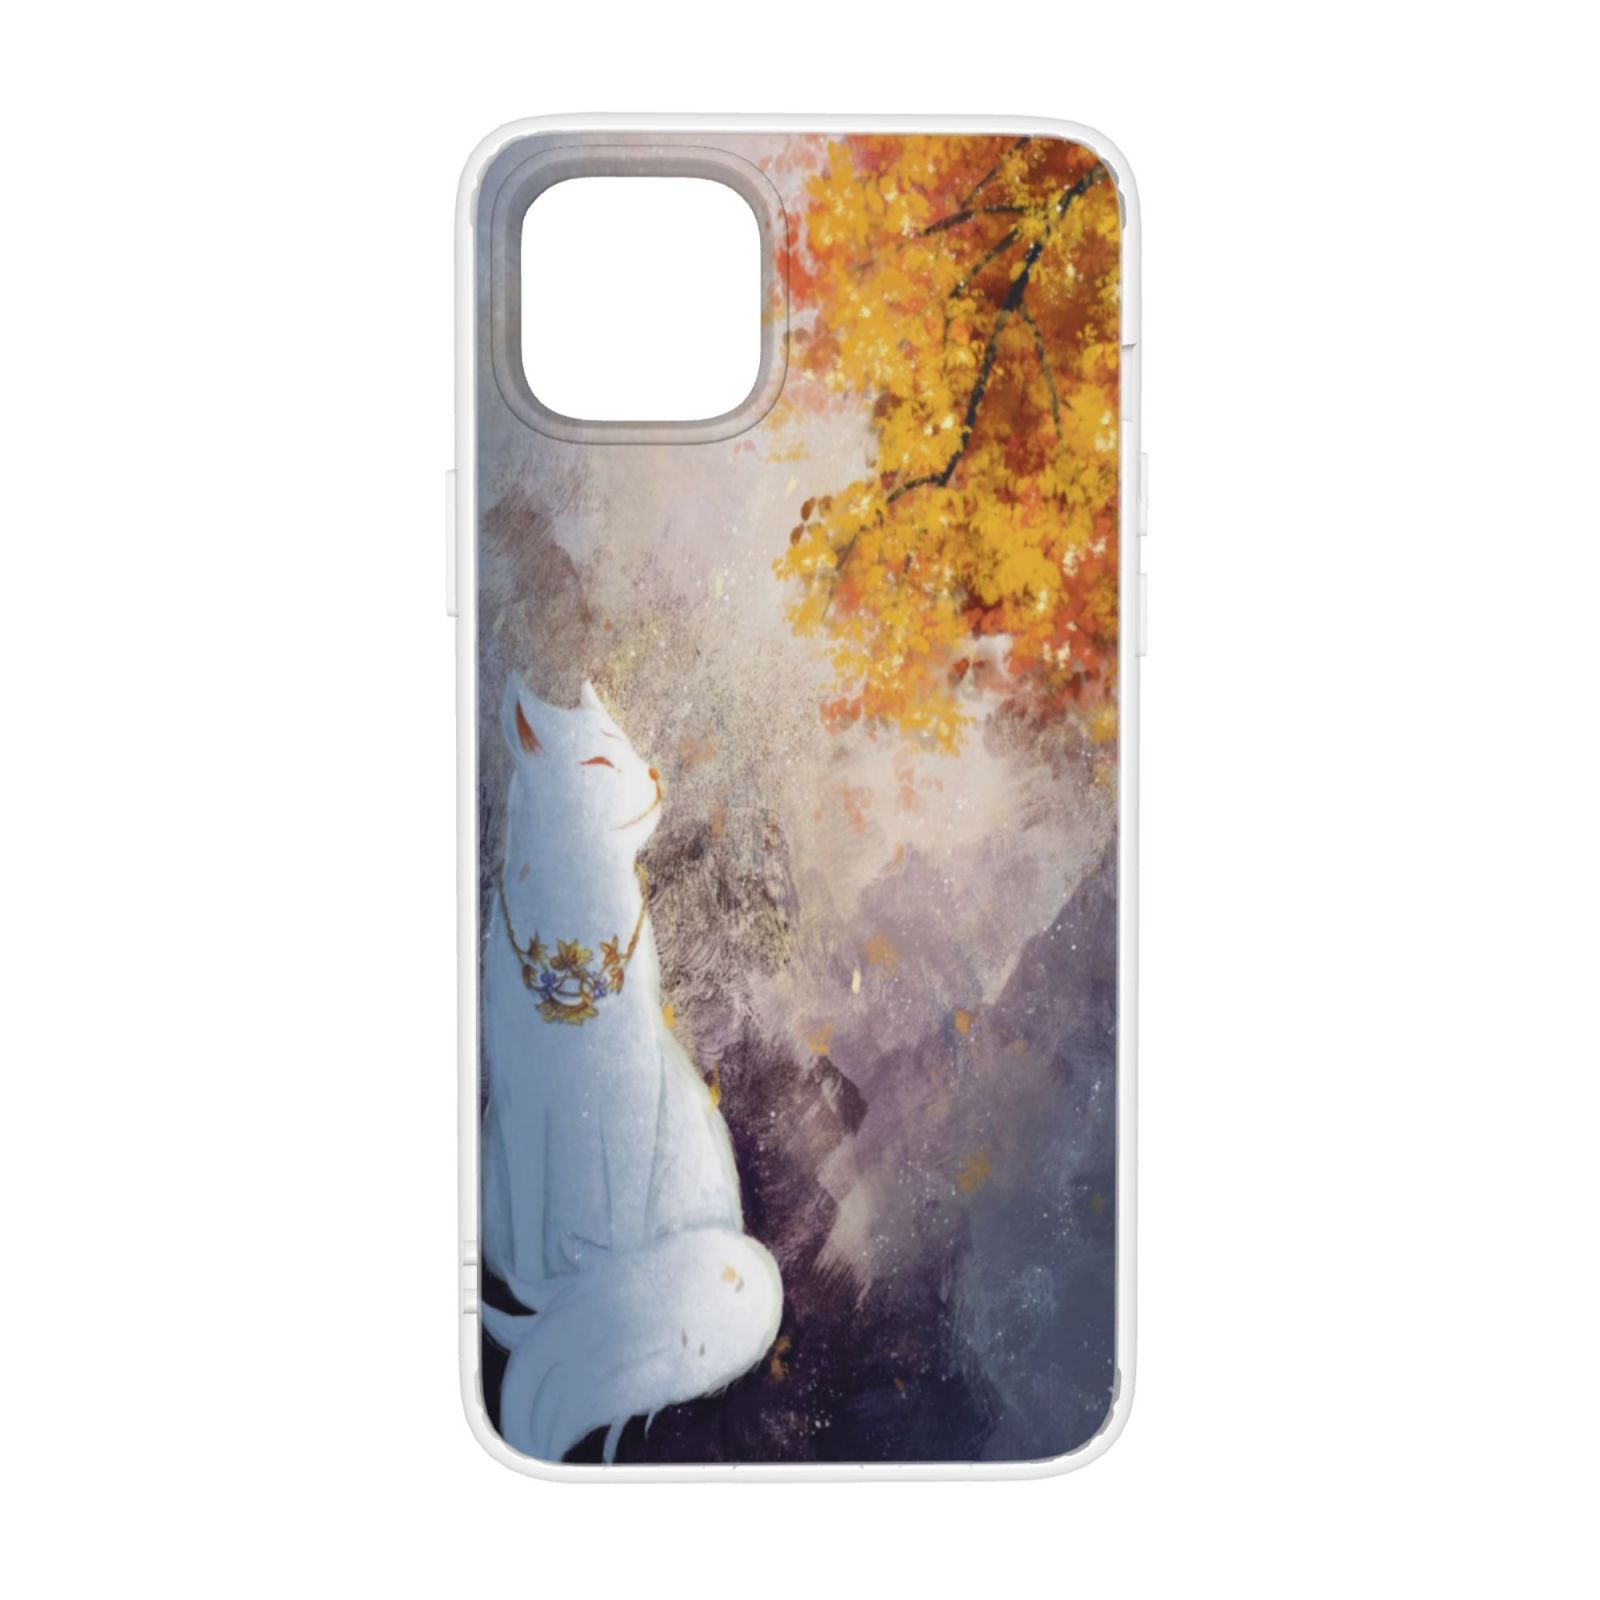 iPhone Case Autumn Leaves And The God Cat Ip13 Mini 4in